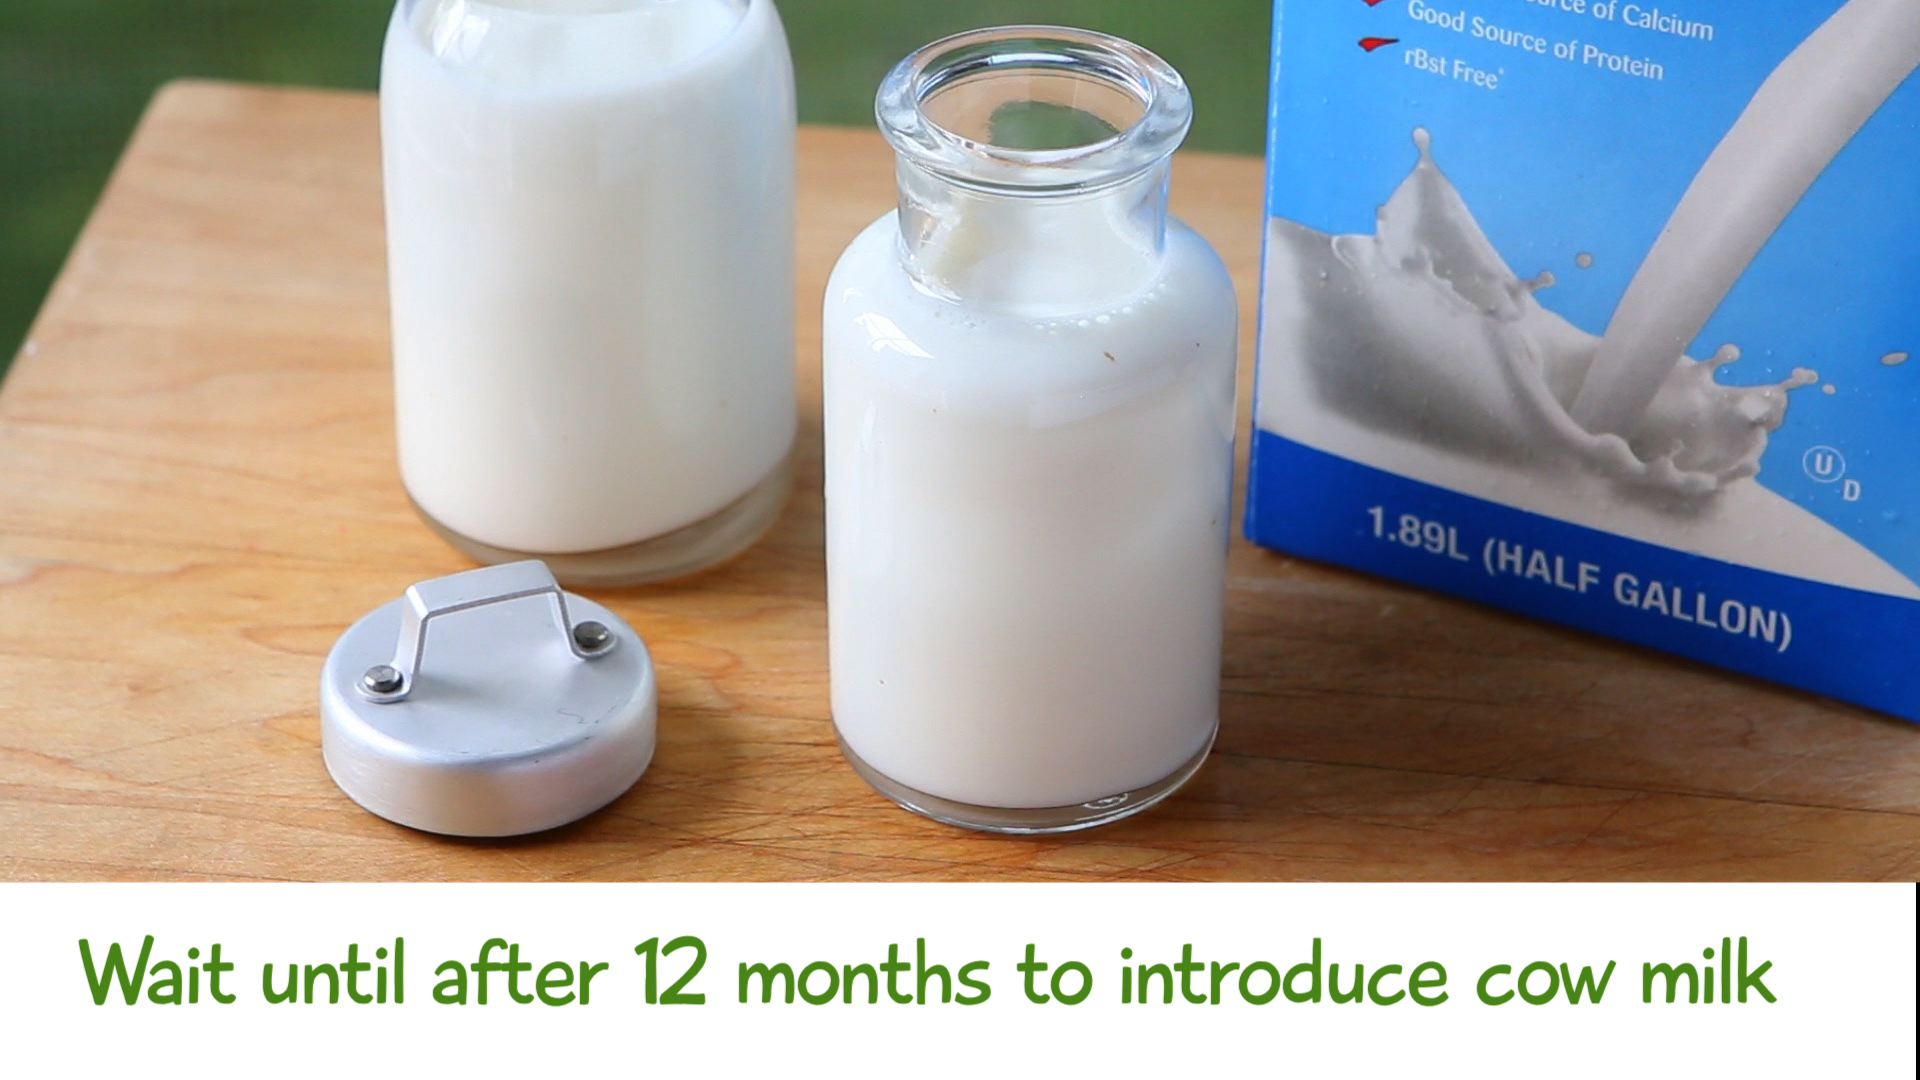 introducing dairy to baby